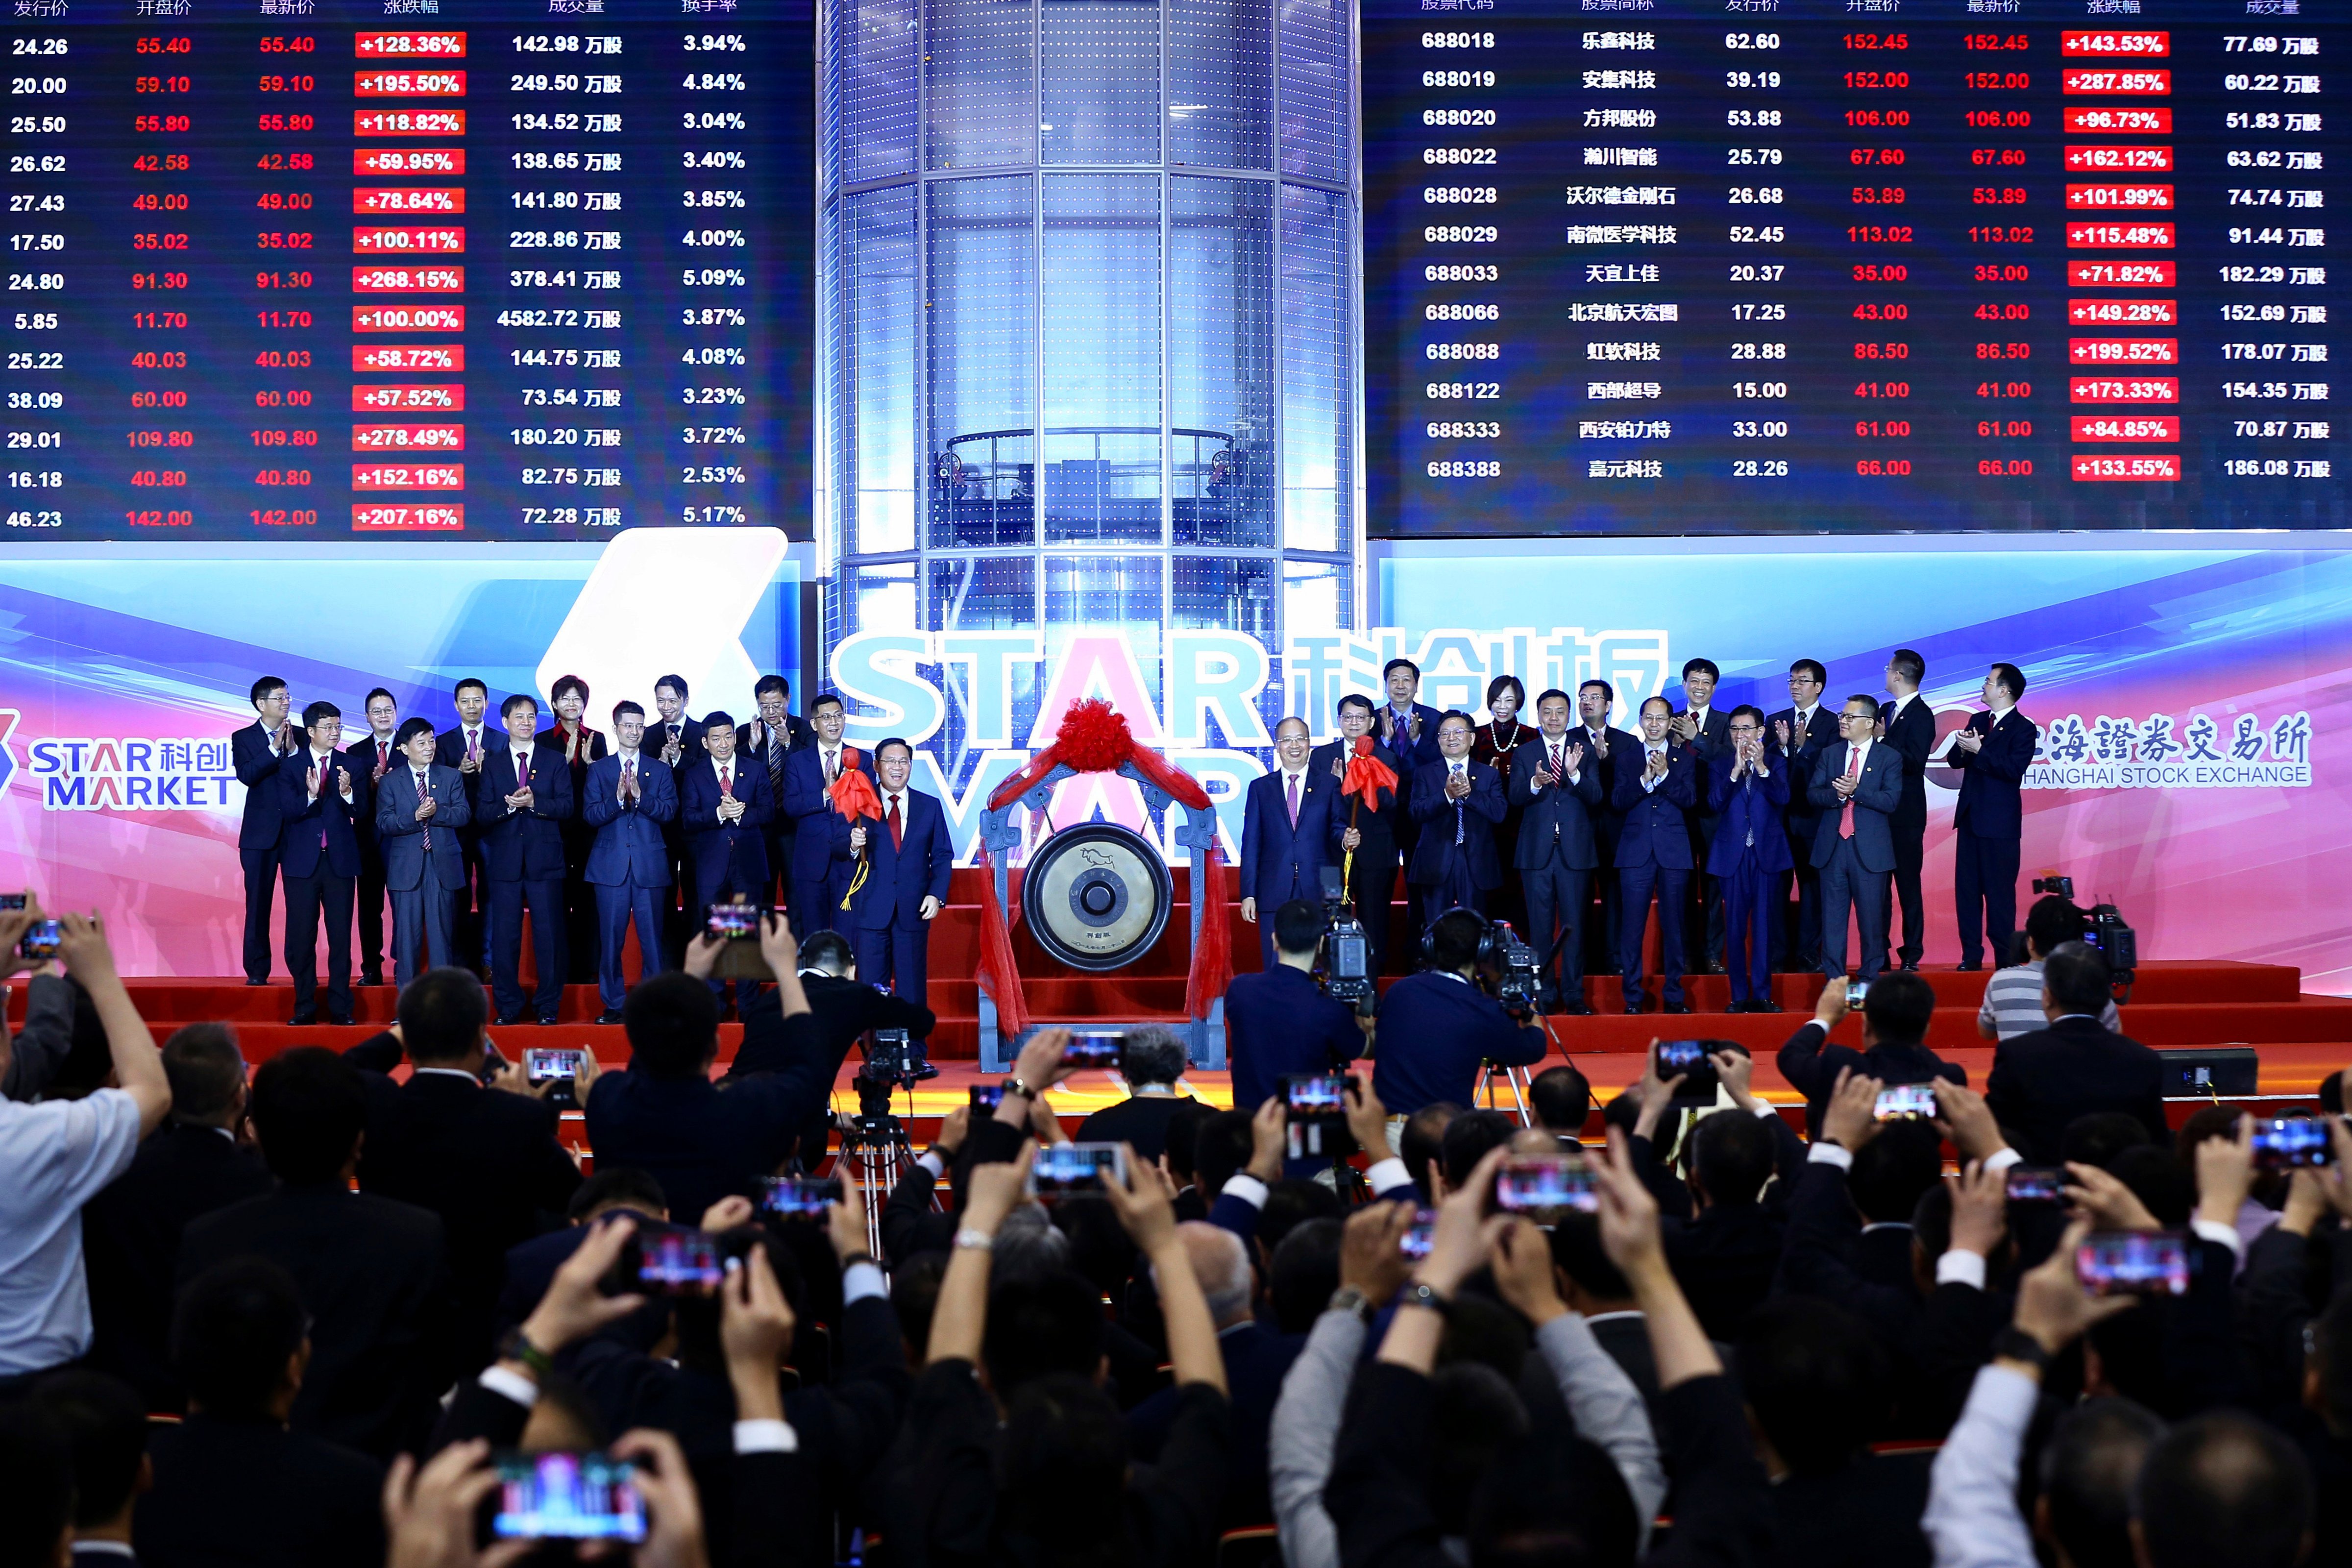 Li Qiang, center left, Shanghai's Party chief, and Yi Huiman, center right, chairman at China Securities Regulatory Commission, and the heads of 25 companies celebrate the launch of the SSE STAR Market in the hall of Shanghai Securities Exchange in Shanghai, China on July 22, 2019. (Chinatopix/AP)